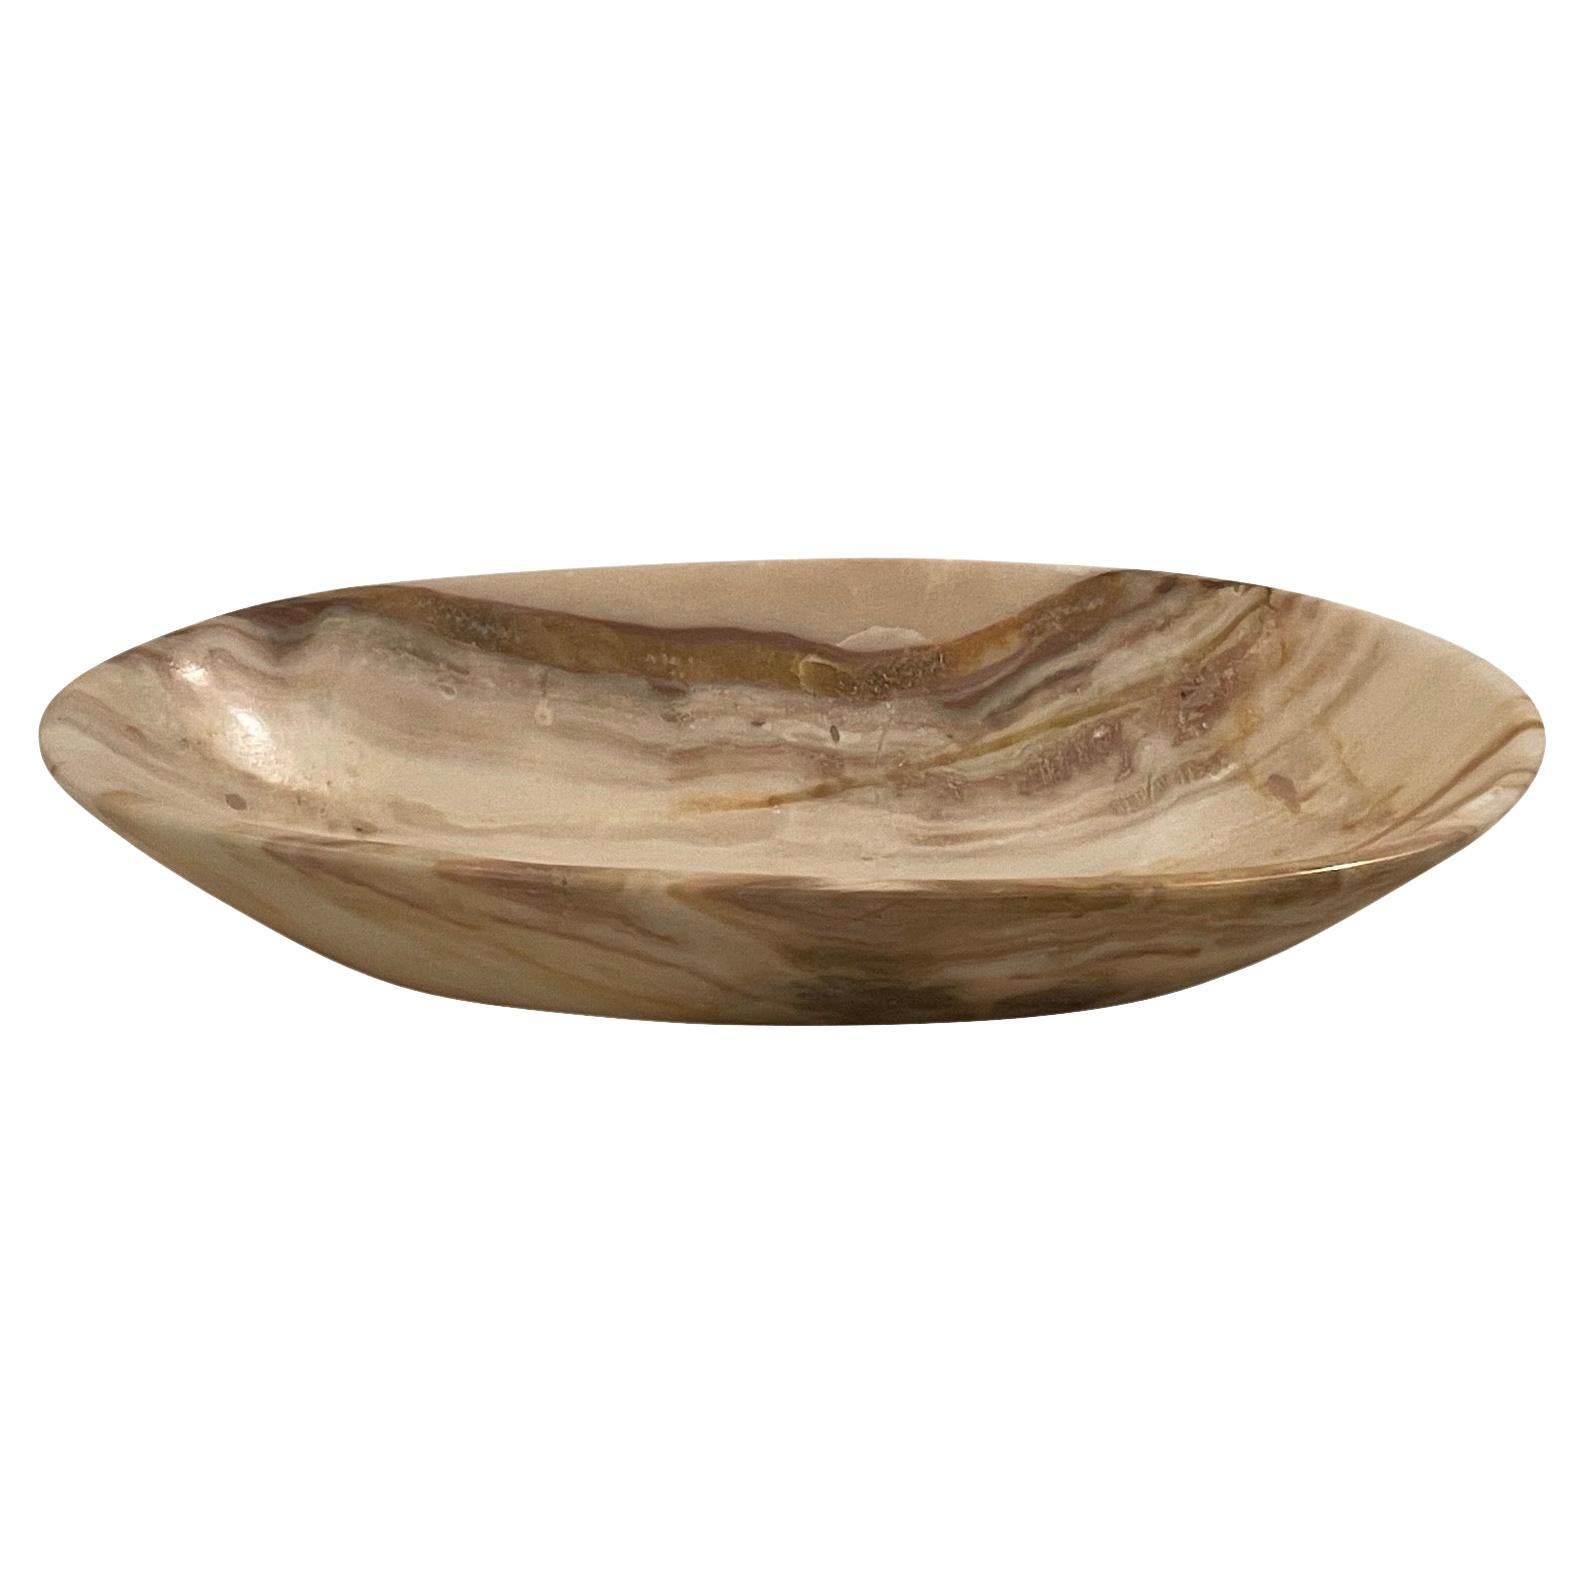 Cream With Rust Oval Shaped Onyx Bowl, Morocco, Contemporary